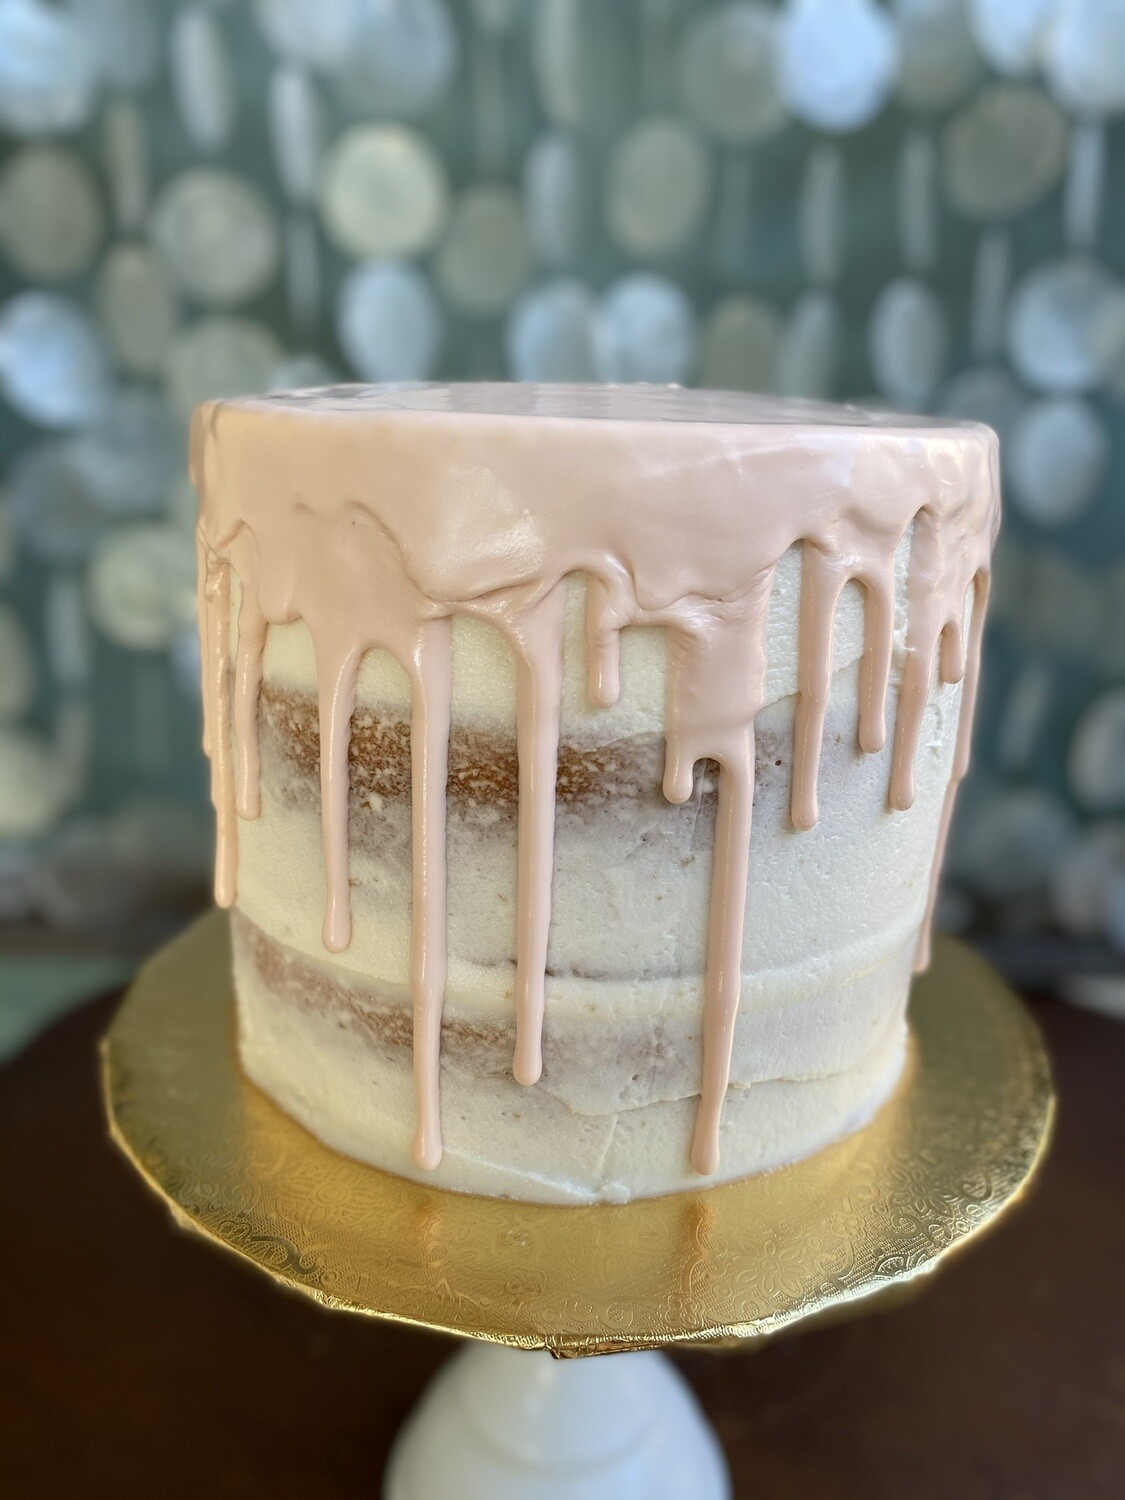 Designer Naked Cake (with Optional Drip Icing)